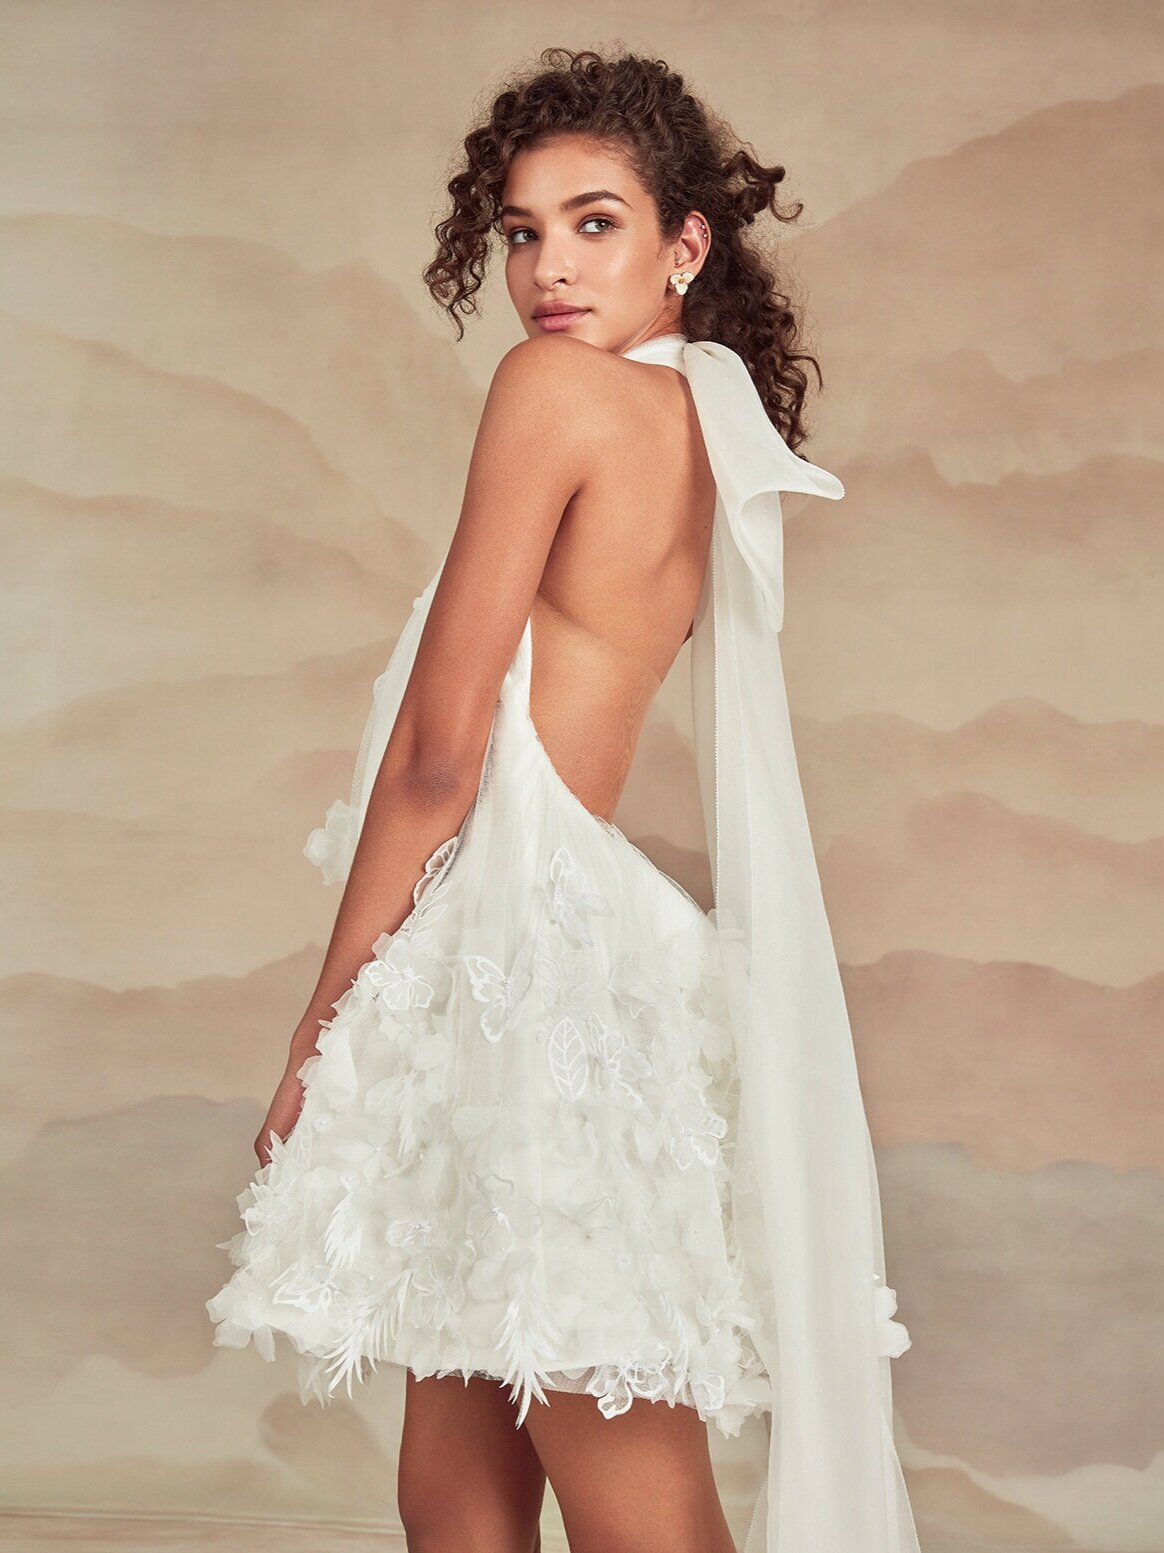 Short Length Sexy Bridals Dresses, Sexy Style Mini Wedding Gowns - June  Bridals